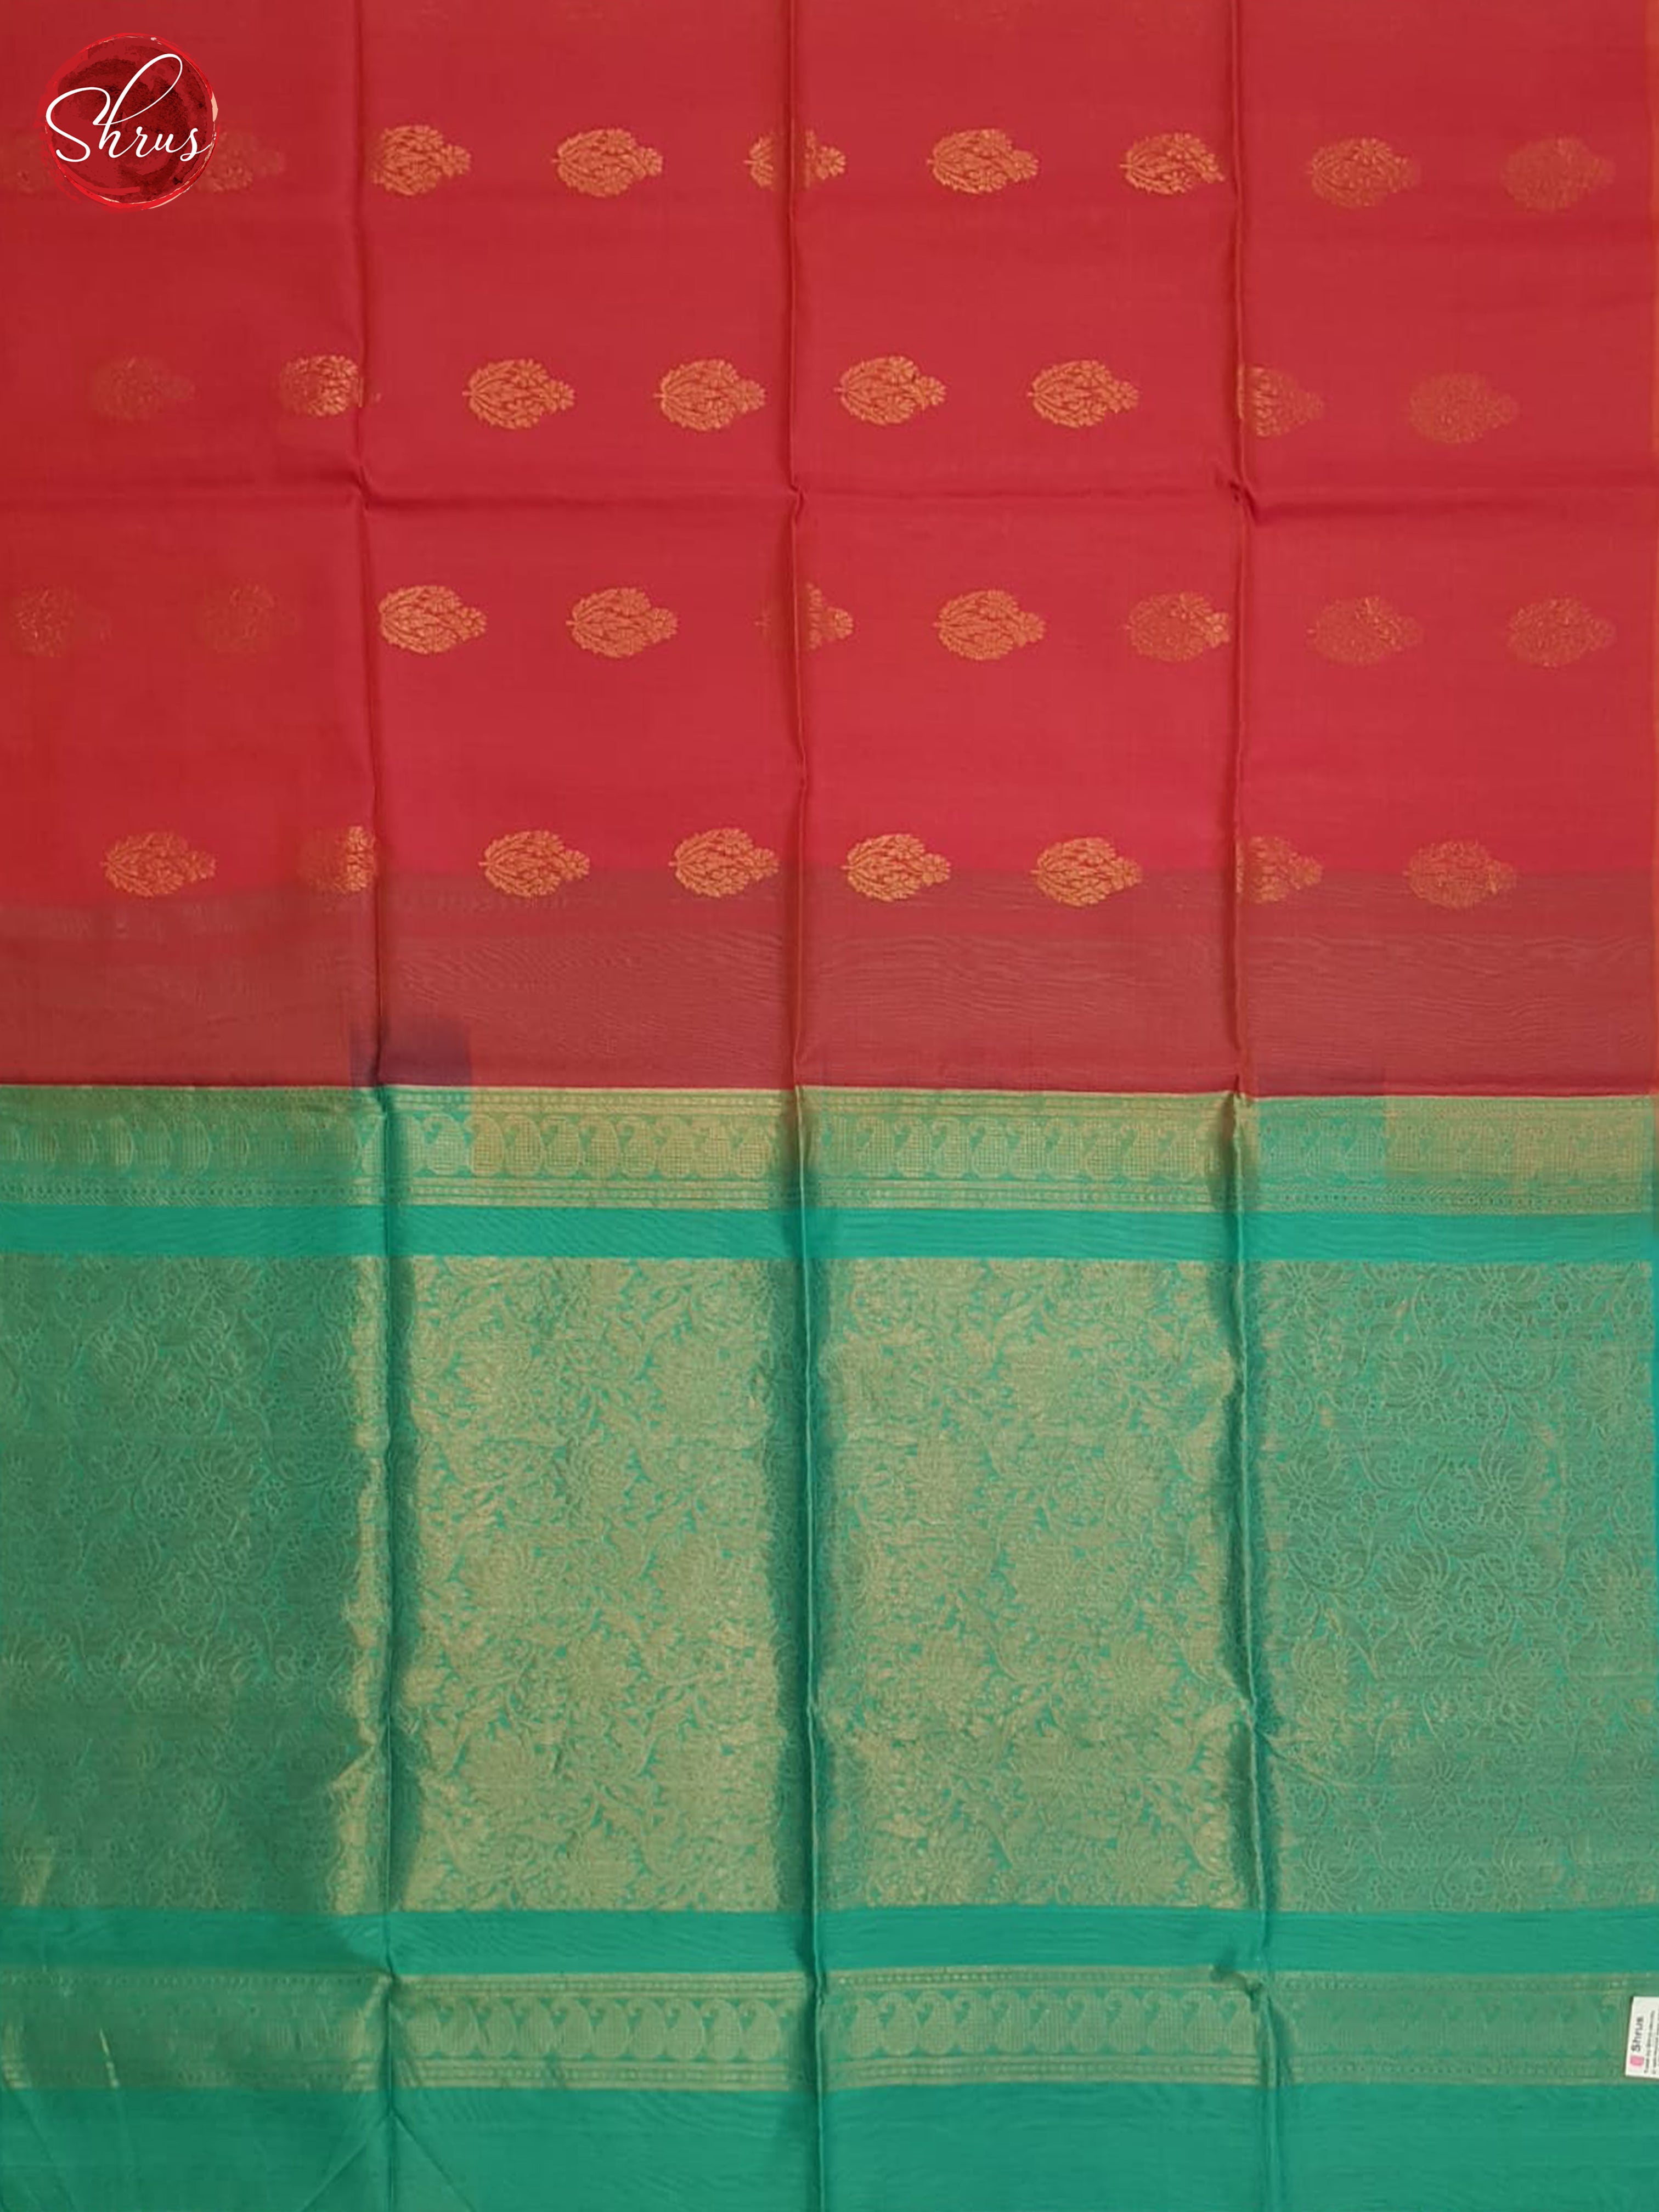 Red And Green-Silk Cotton Saree - Shop on ShrusEternity.com